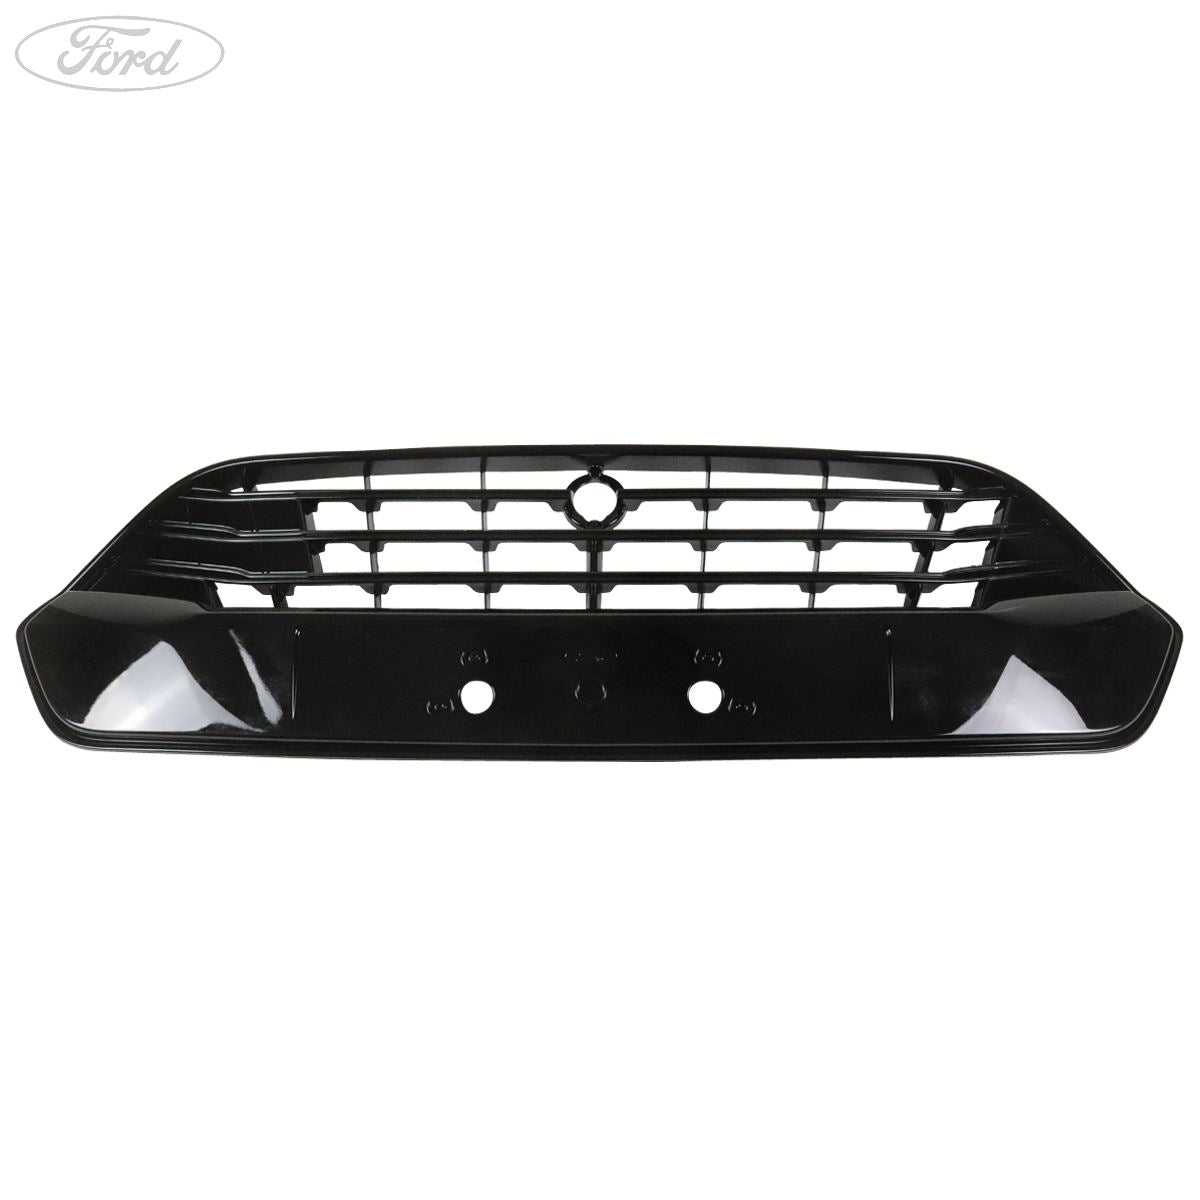 Ford, TRANSIT TOURNEO CUSTOM FRONT RADIATOR GRILLE COVER BLACK